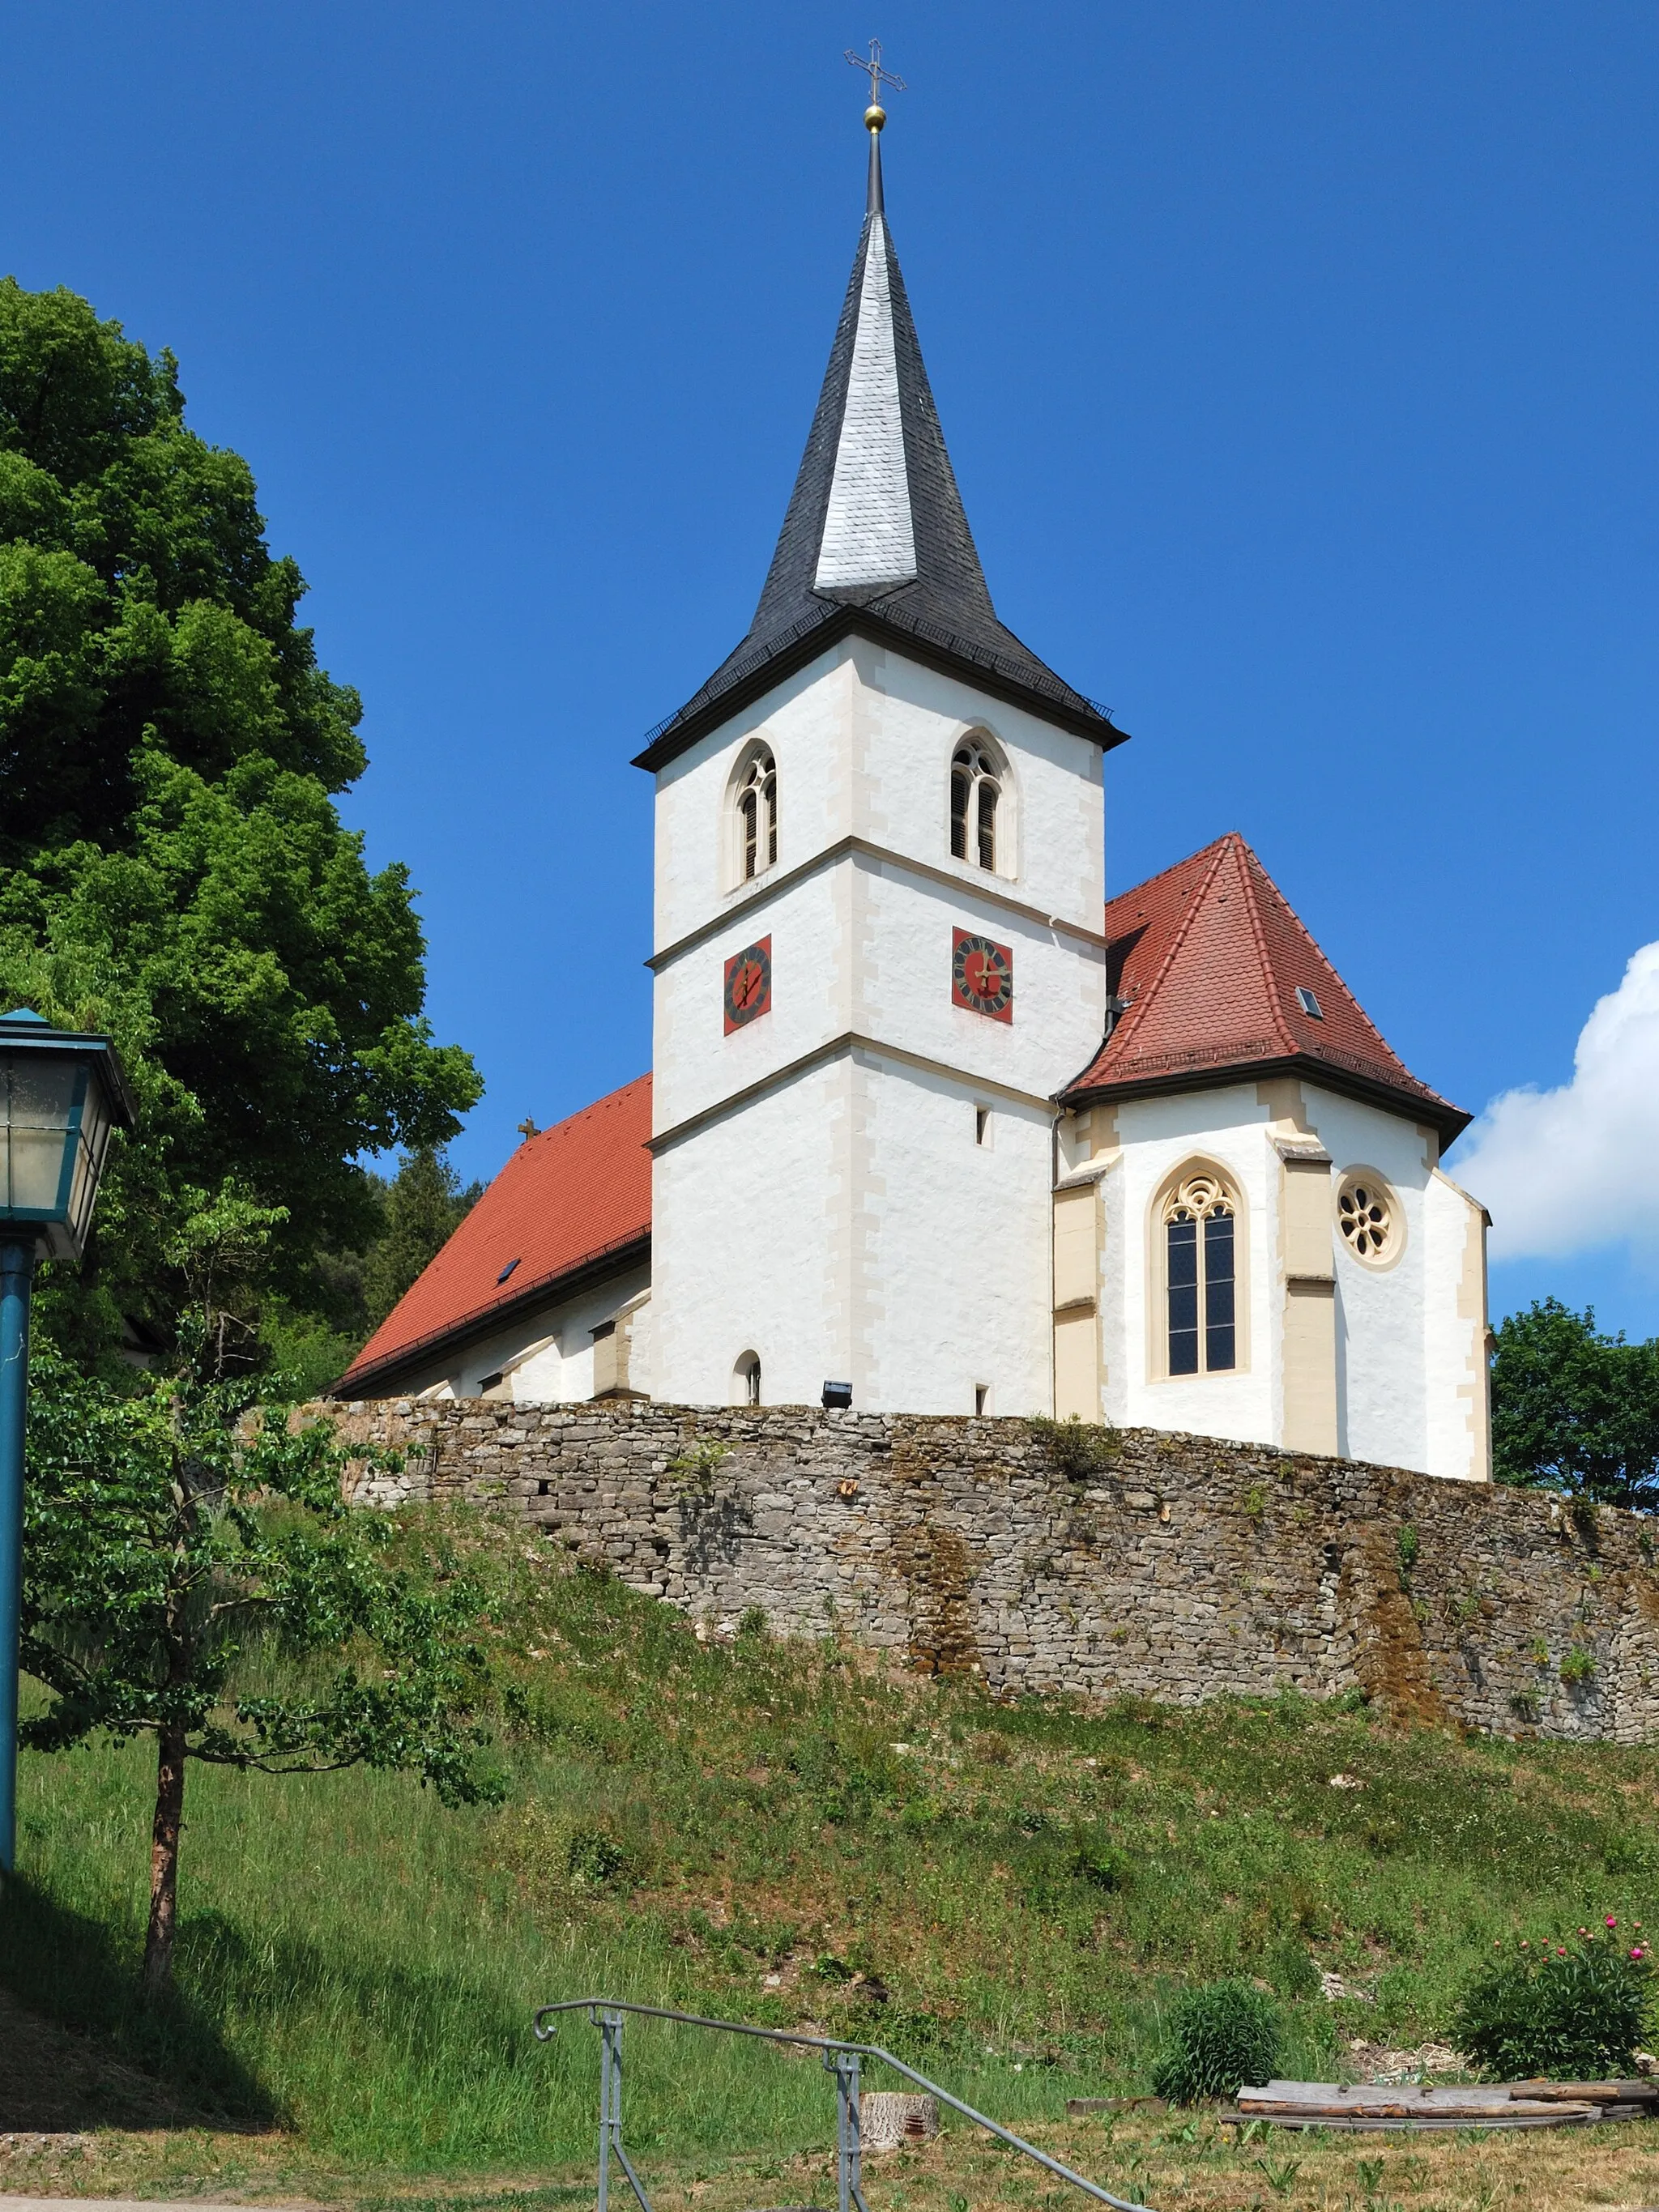 Photo showing: The catholic church St. Martin in Ailringen in Southern Germany.